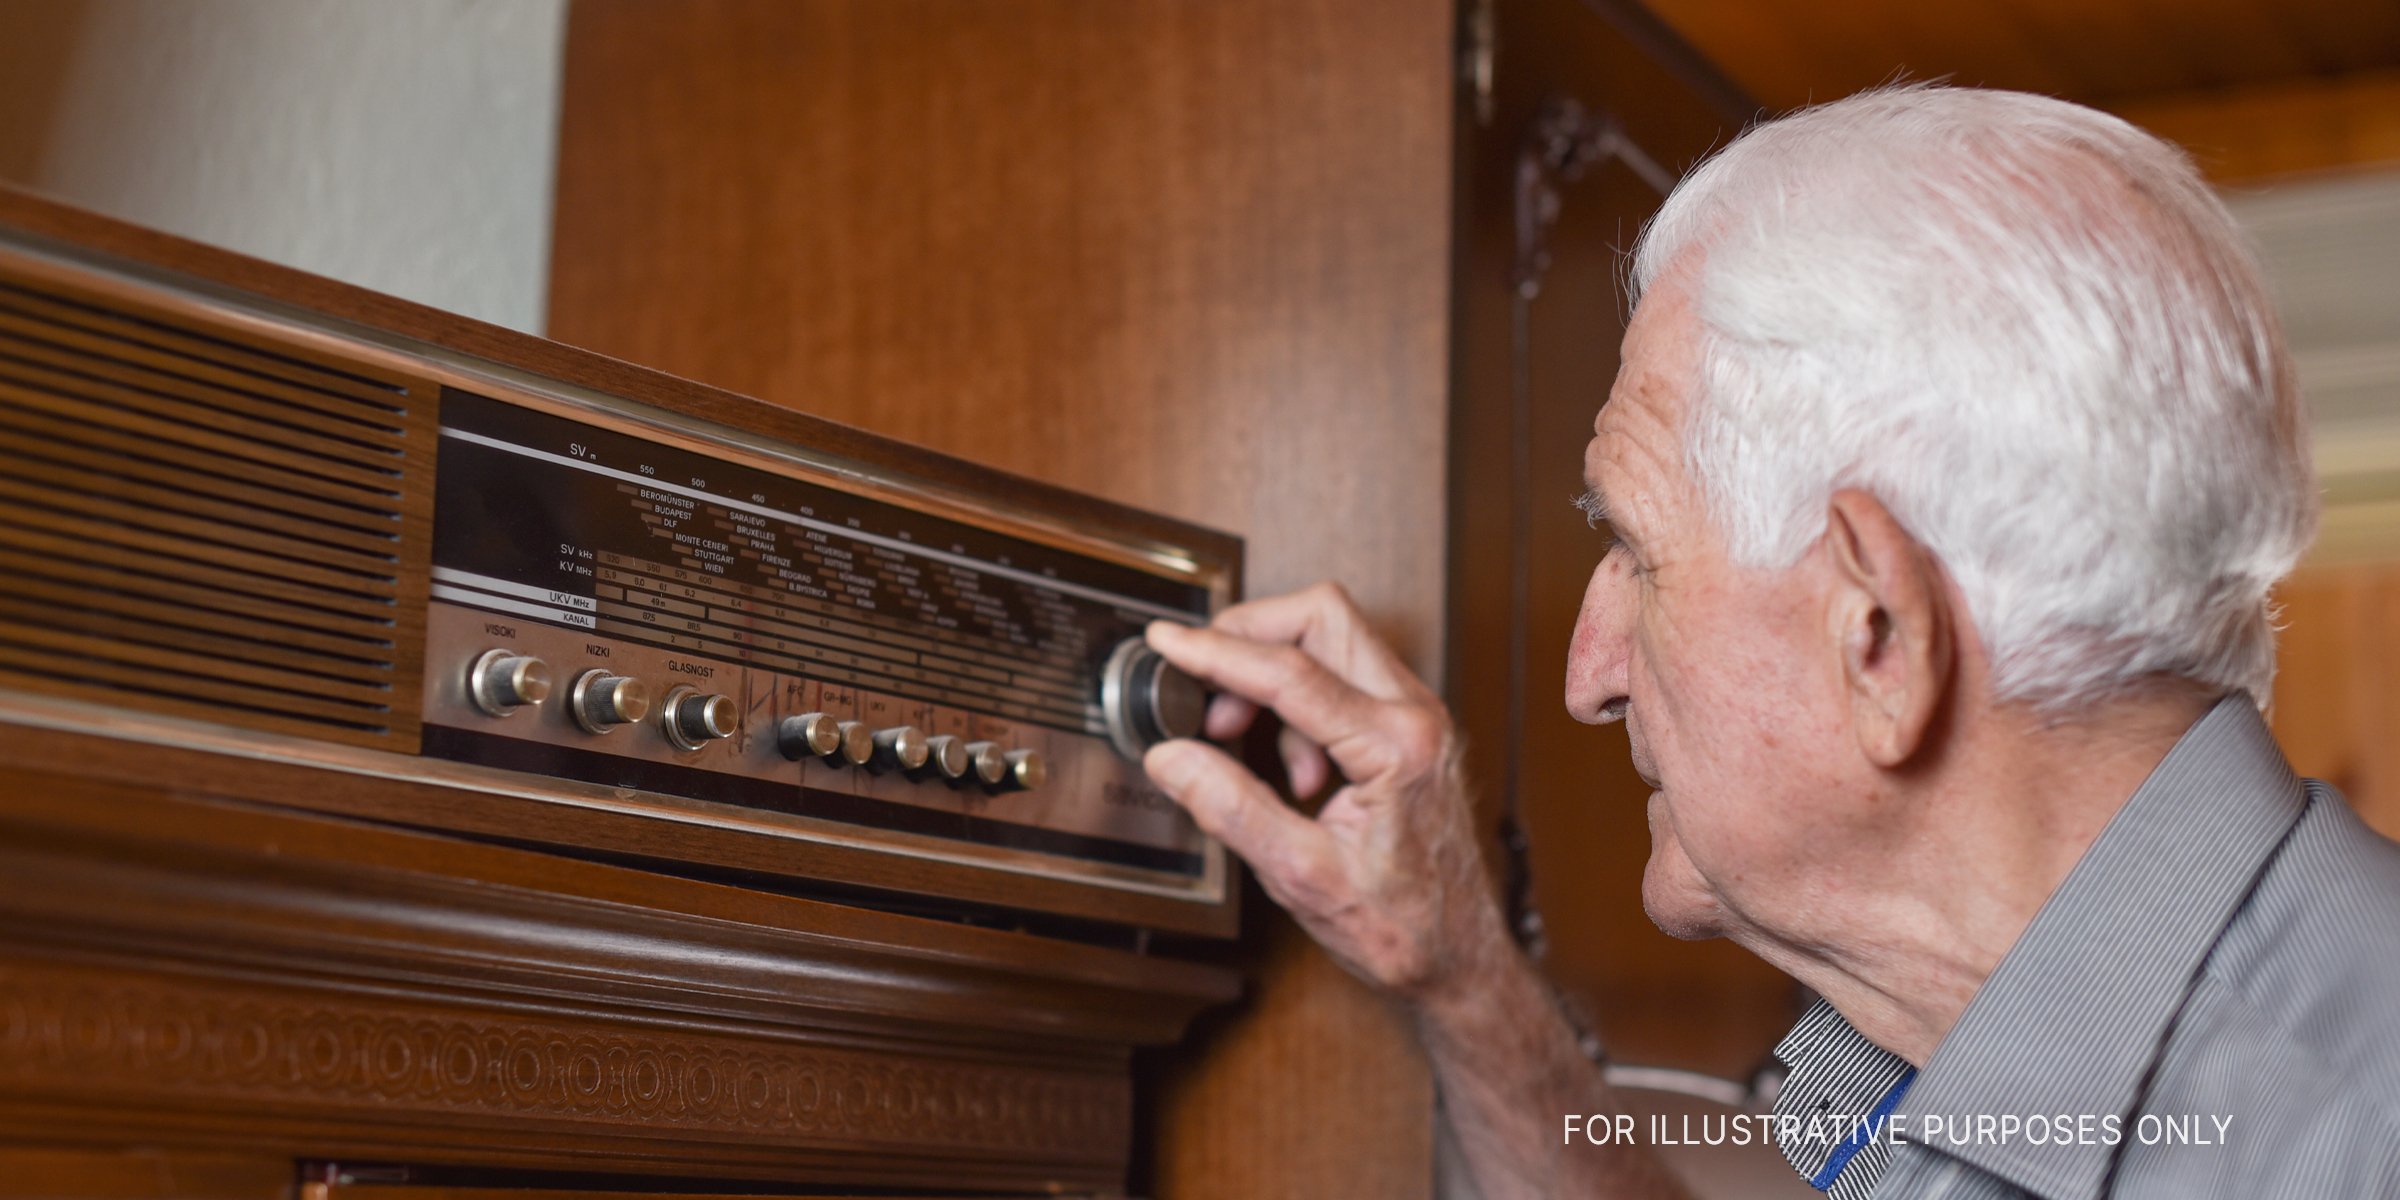 Elderly man tunes frequency on an old-fashioned radio | Source: Getty Images